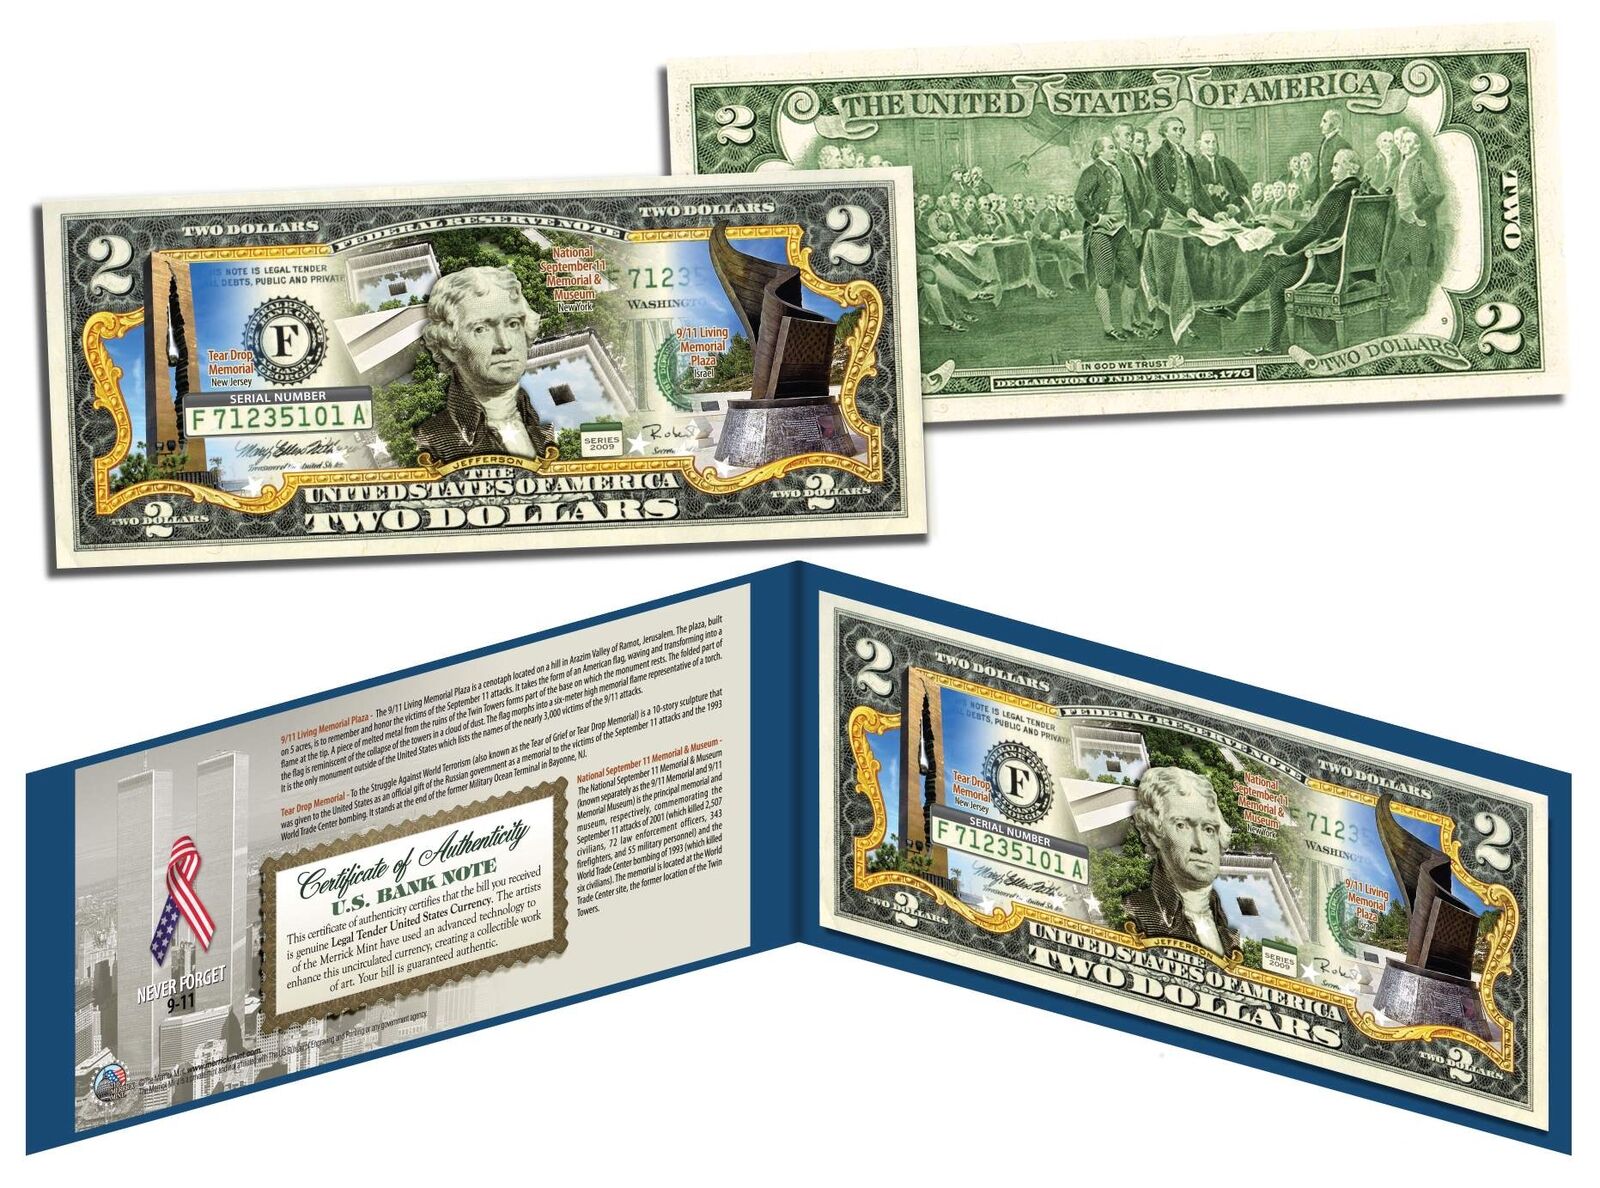 OFFICIAL 9/11 World Trade Center NATIONAL MUSEUM MEMORIALS Colorized US $2 Bill